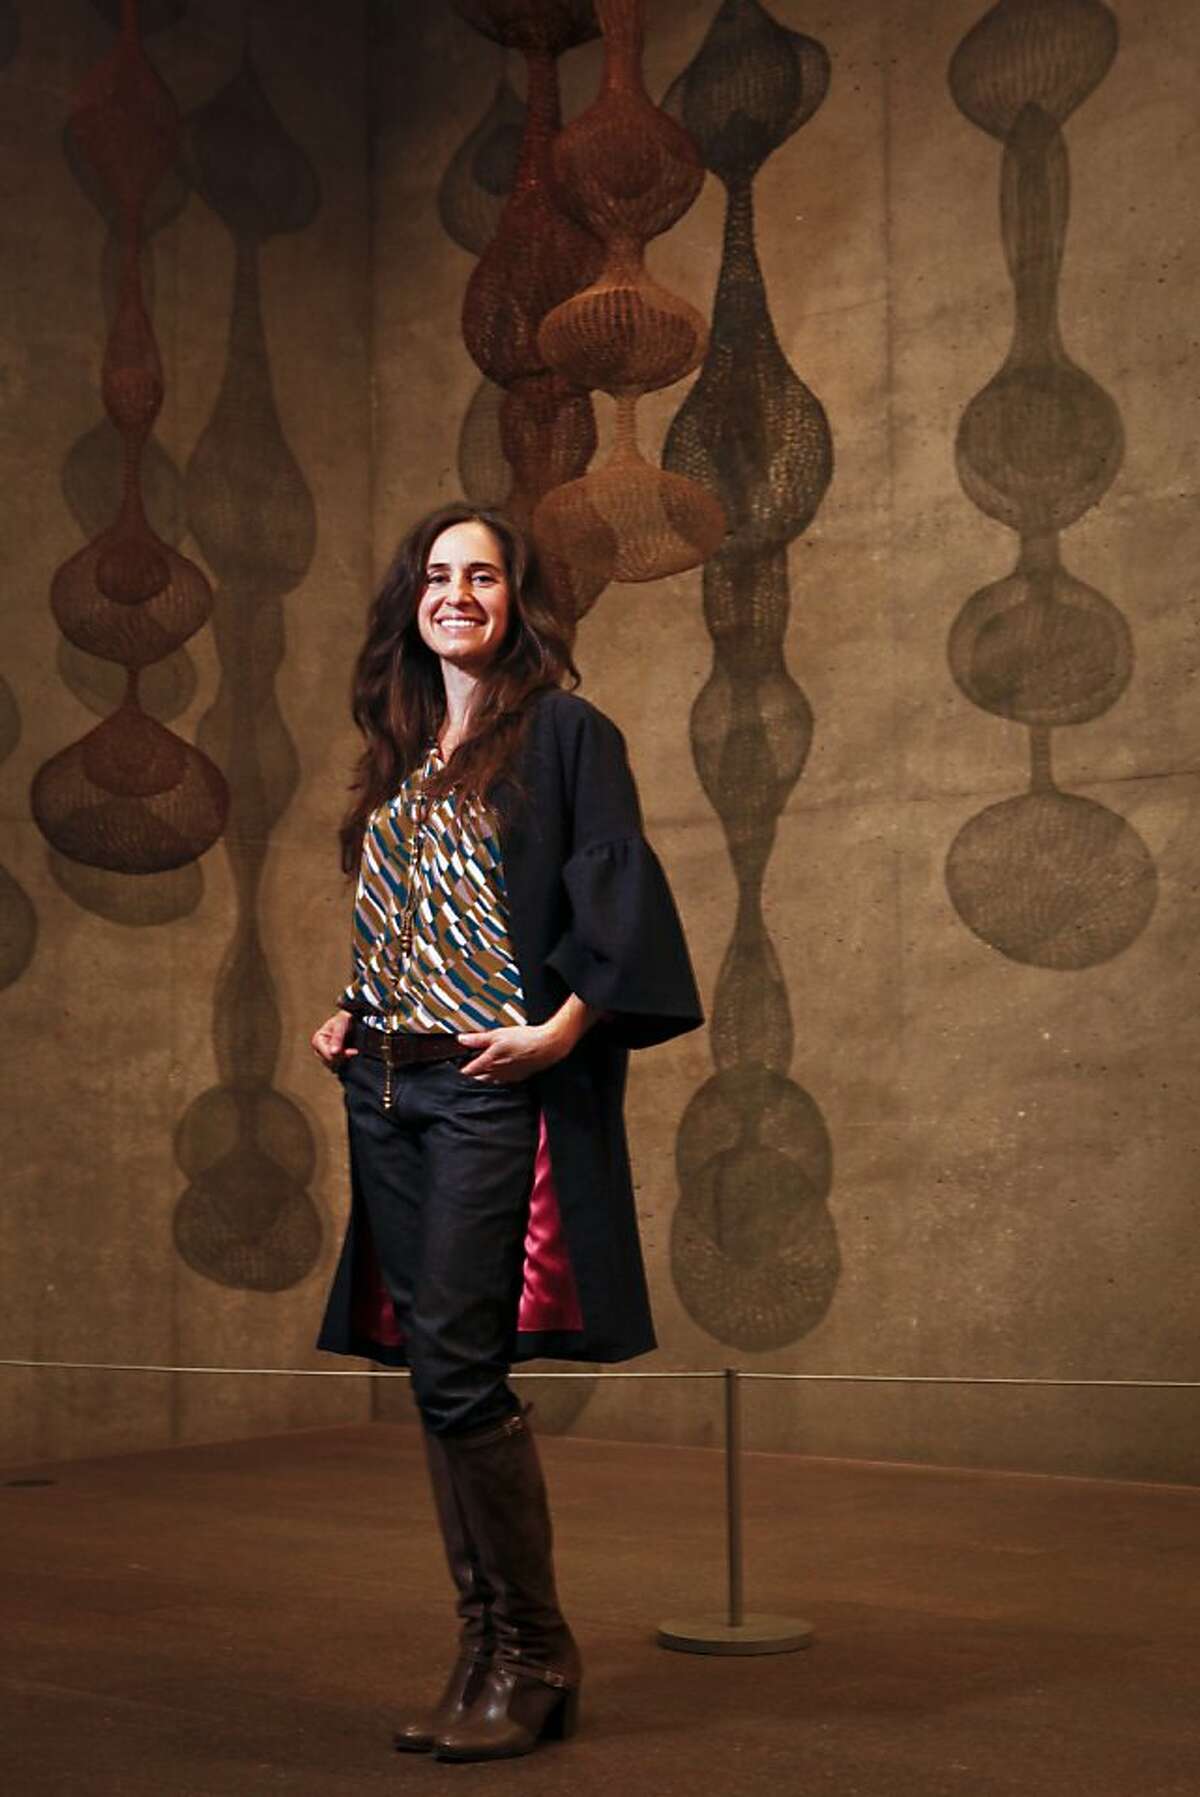 Fashion designer Erica Tanov stands in the Ruth Asawa gallery at the de Young Museum on Monday, Dec. 12, 2011 in San Francisco, Calif.